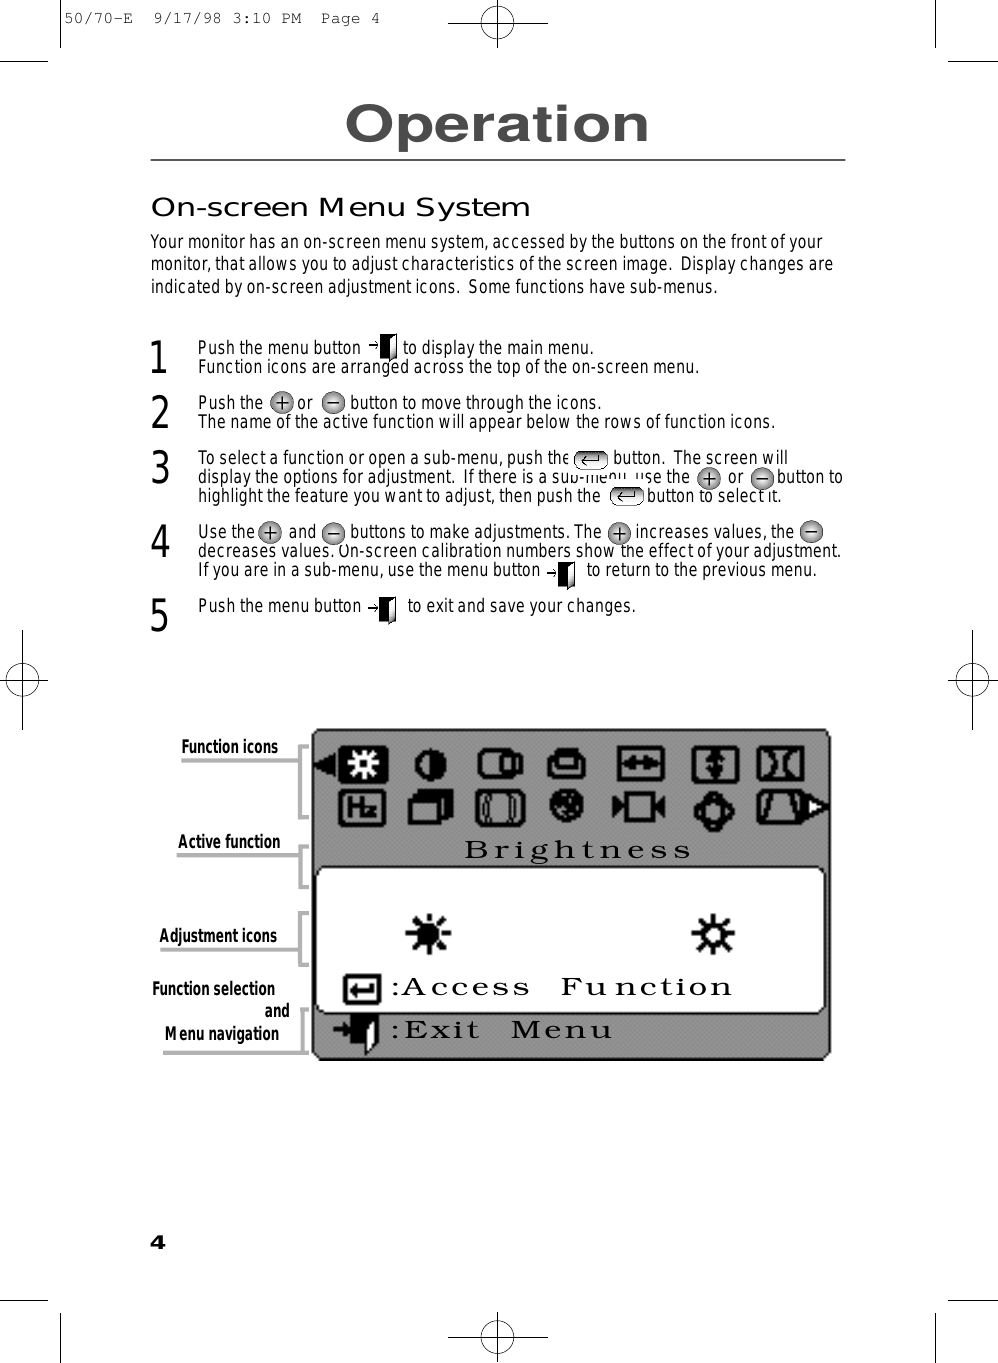 OperationOn-screen Menu SystemYour monitor has an on-screen menu system, accessed by the buttons on the front of yourmonitor, that allows you to adjust characteristics of the screen image.  Display changes areindicated by on-screen adjustment icons.  Some functions have sub-menus.  1  Push the menu button          to display the main menu. Function icons are arranged across the top of the on-screen menu.2  Push the        or         button to move through the icons. The name of the active function will appear below the rows of function icons.  3  To select a function or open a sub-menu, push the          button.  The screen will display the options for adjustment.  If there is a sub-menu, use the         or        button tohighlight the feature you want to adjust, then push the           button to select it. 4  Use the        and        buttons to make adjustments. The        increases values, thedecreases values. On-screen calibration numbers show the effect of your adjustment.If you are in a sub-menu, use the menu button           to return to the previous menu. 5Push the menu button           to exit and save your changes. Function iconsAdjustment iconsActive function Function selection and Menu navigation4B r i g h t n e s s:Access  Function:Exit  Menu50/70-E  9/17/98 3:10 PM  Page 4